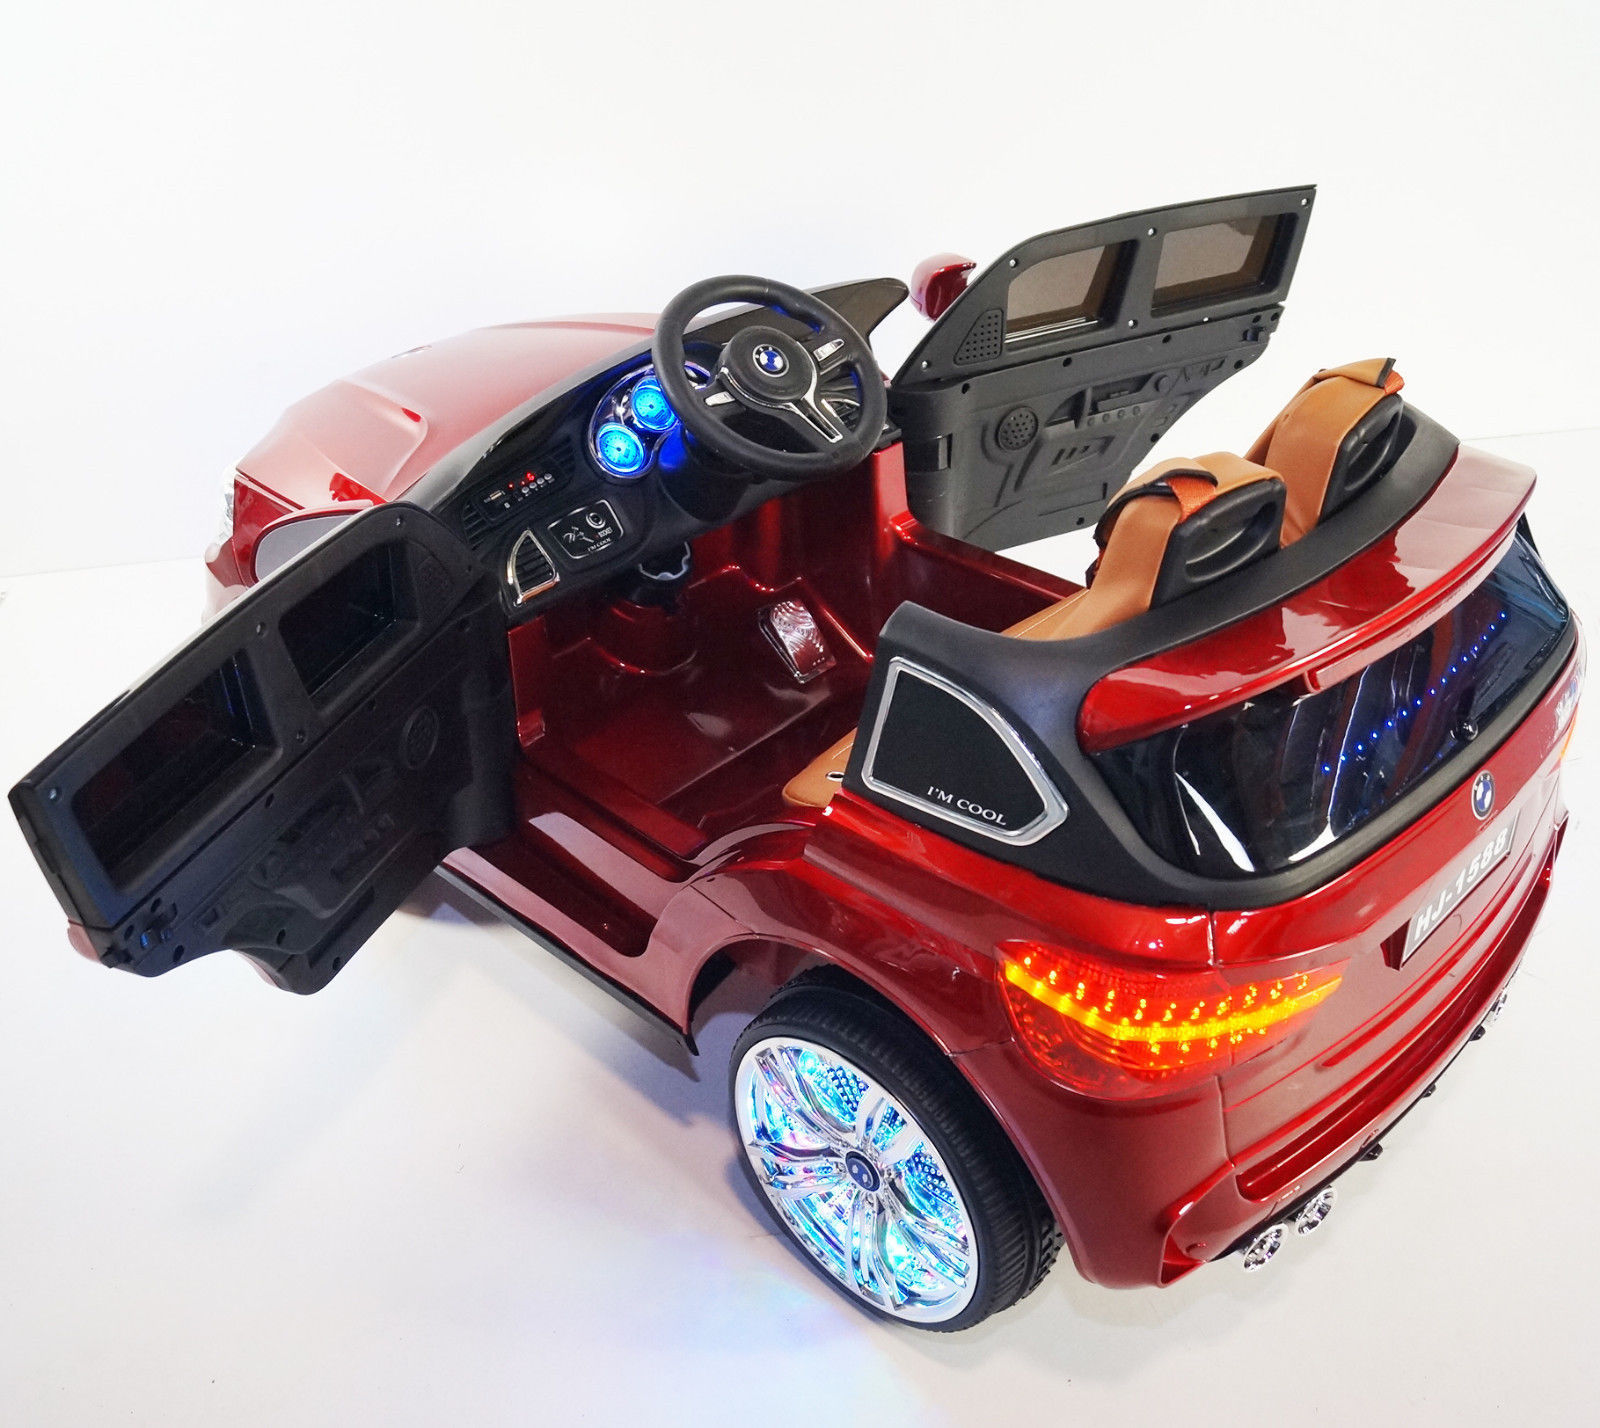 BMW X5 Style Ride On Toy Car for Kids With Remote Control Battery ...